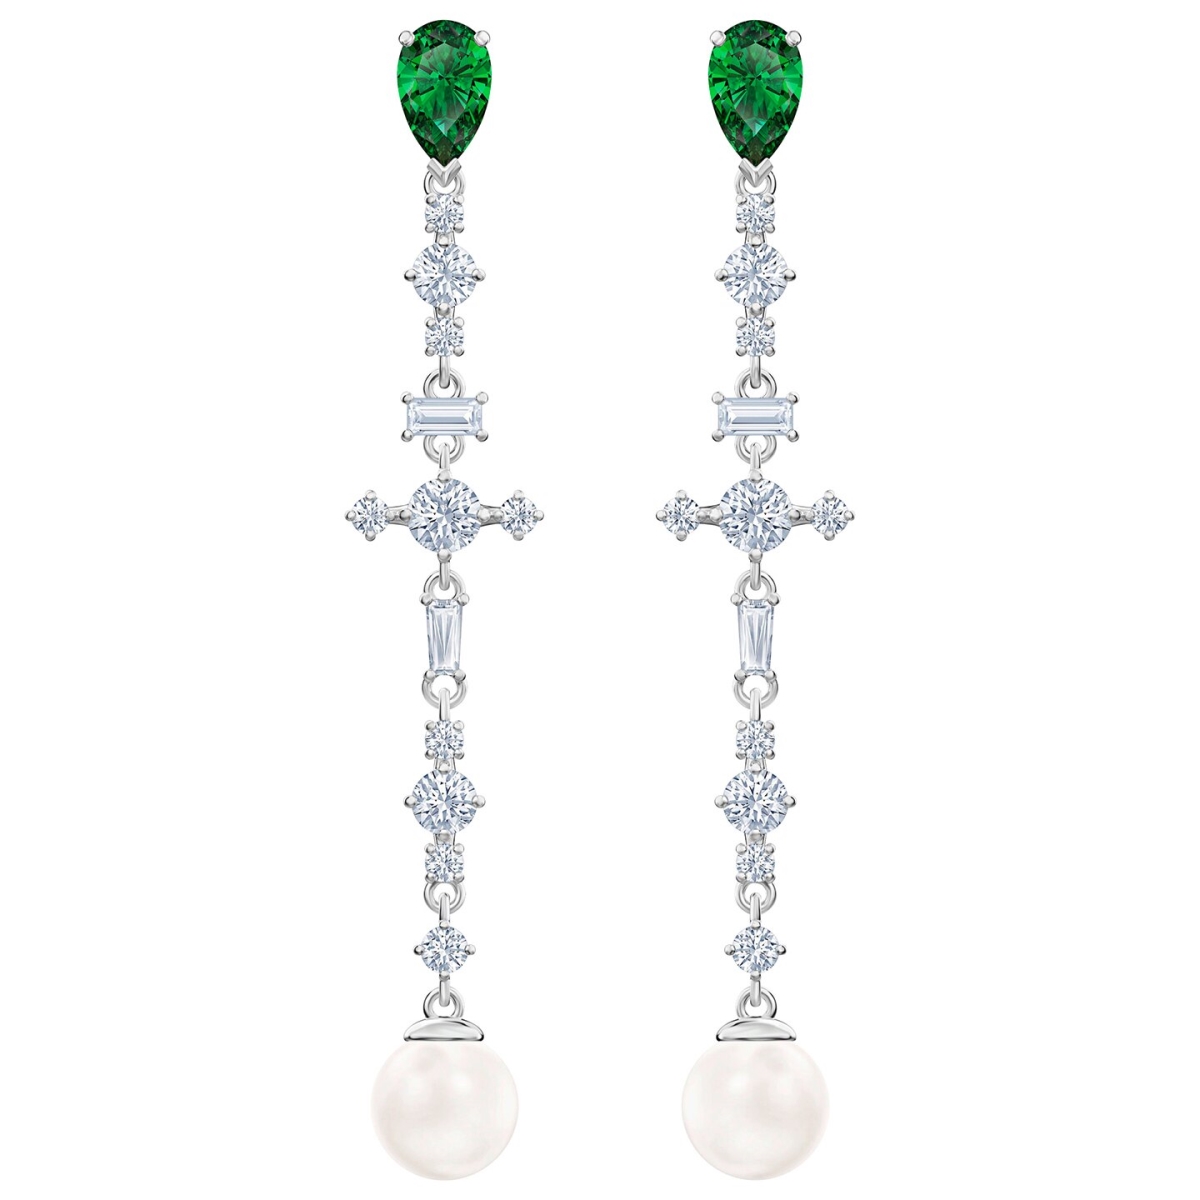 5493098 Perfection Pierced Earrings, Rhodium Plated, Green